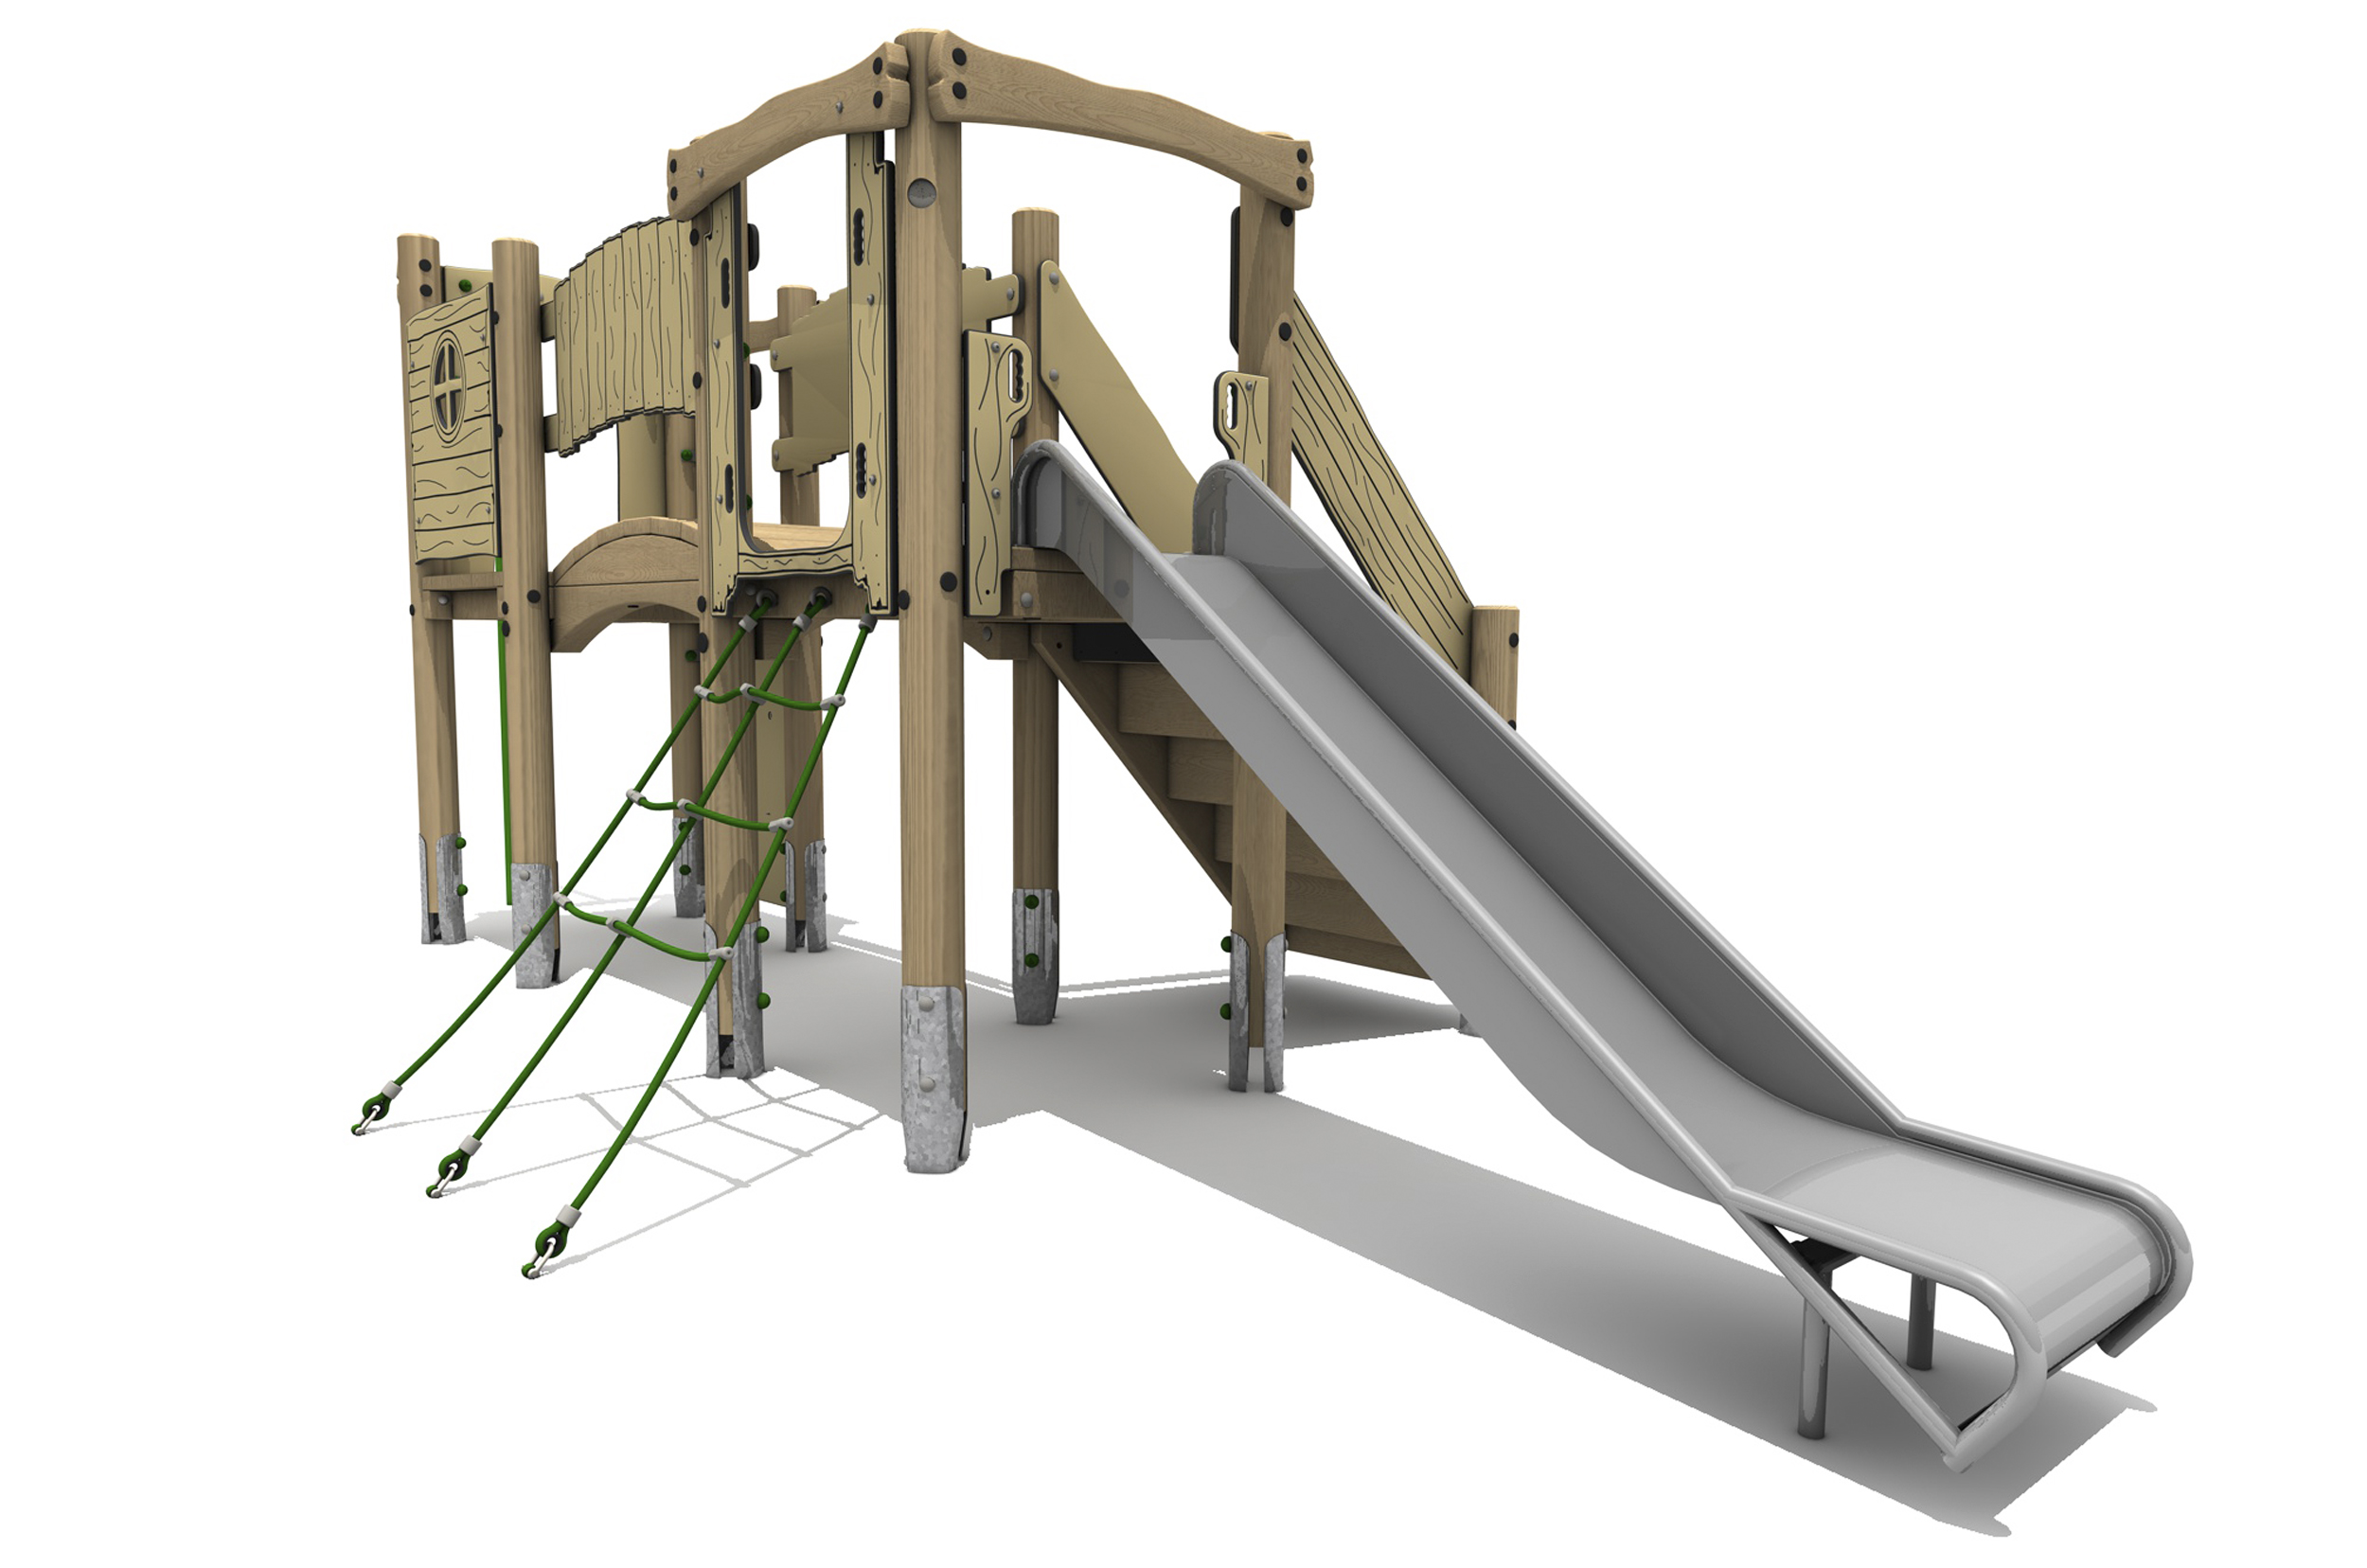 Timber Tower Double Deck 01, A timber tower climber with steel slide at the front, a green access net to the left and another platform and arched bridge in the background.